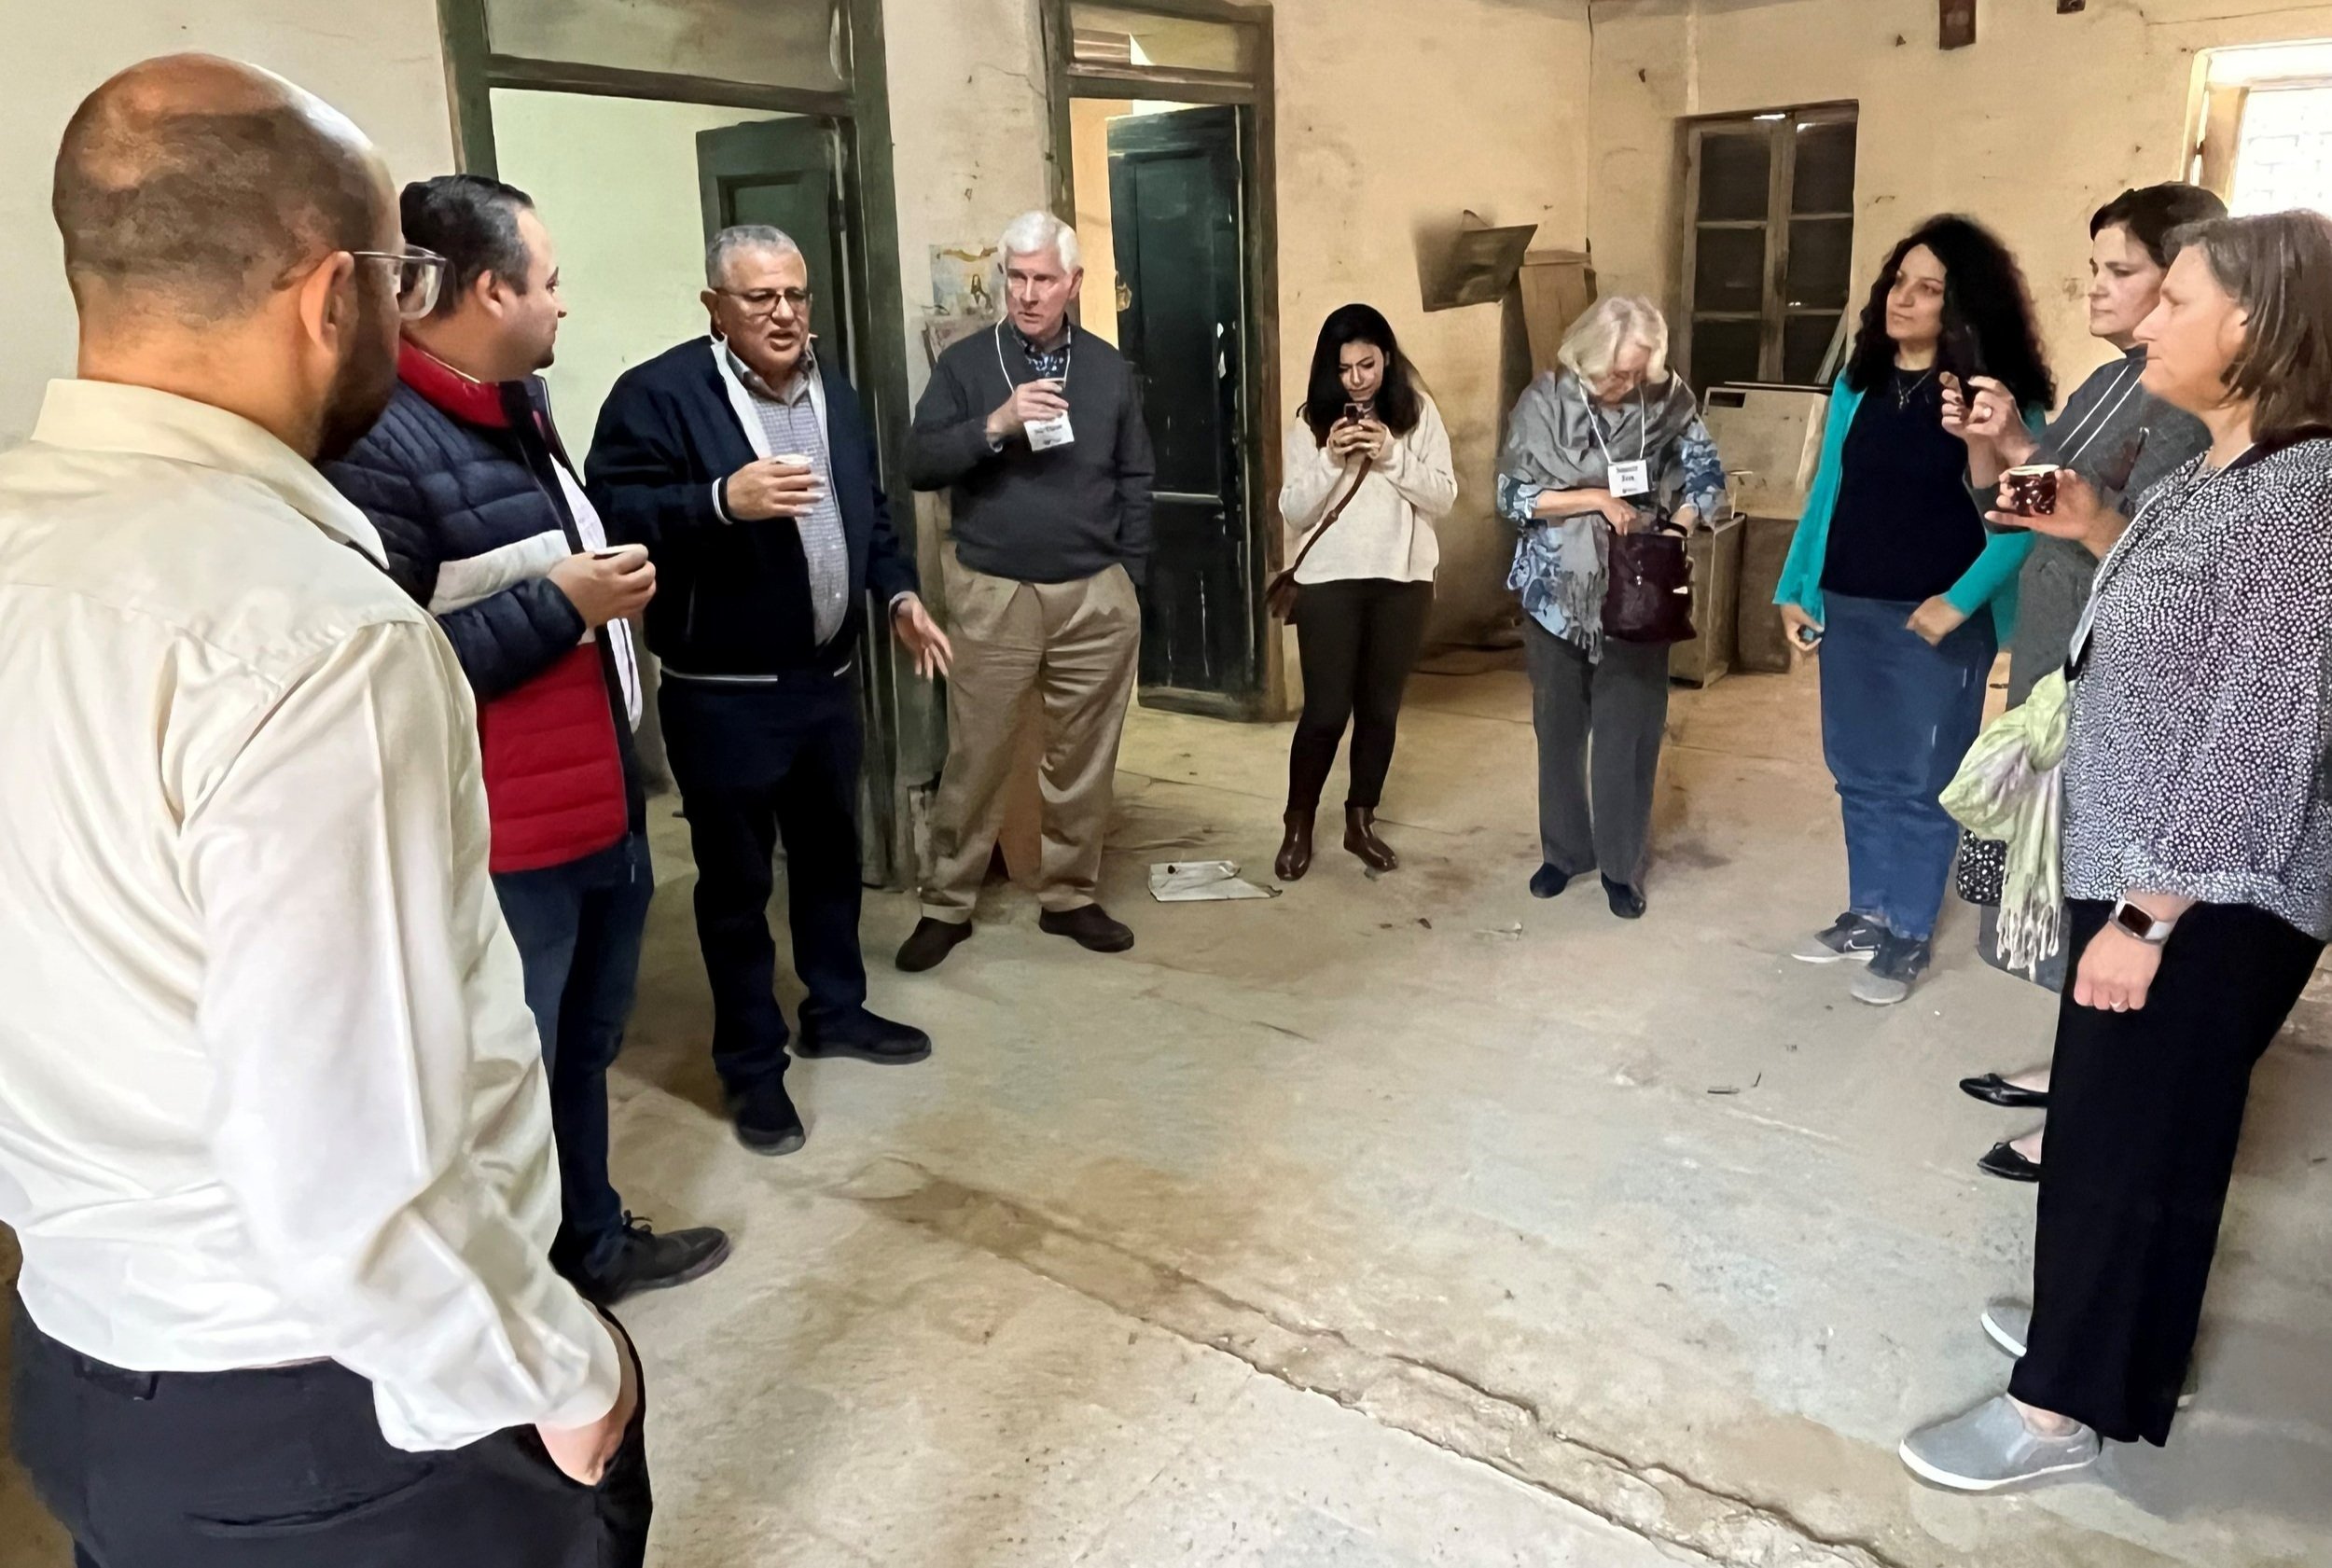  Dr. Tharwat Wahba shares about Tamiya Church’s history, active ministry and needs…over excellent Turkish coffee! 